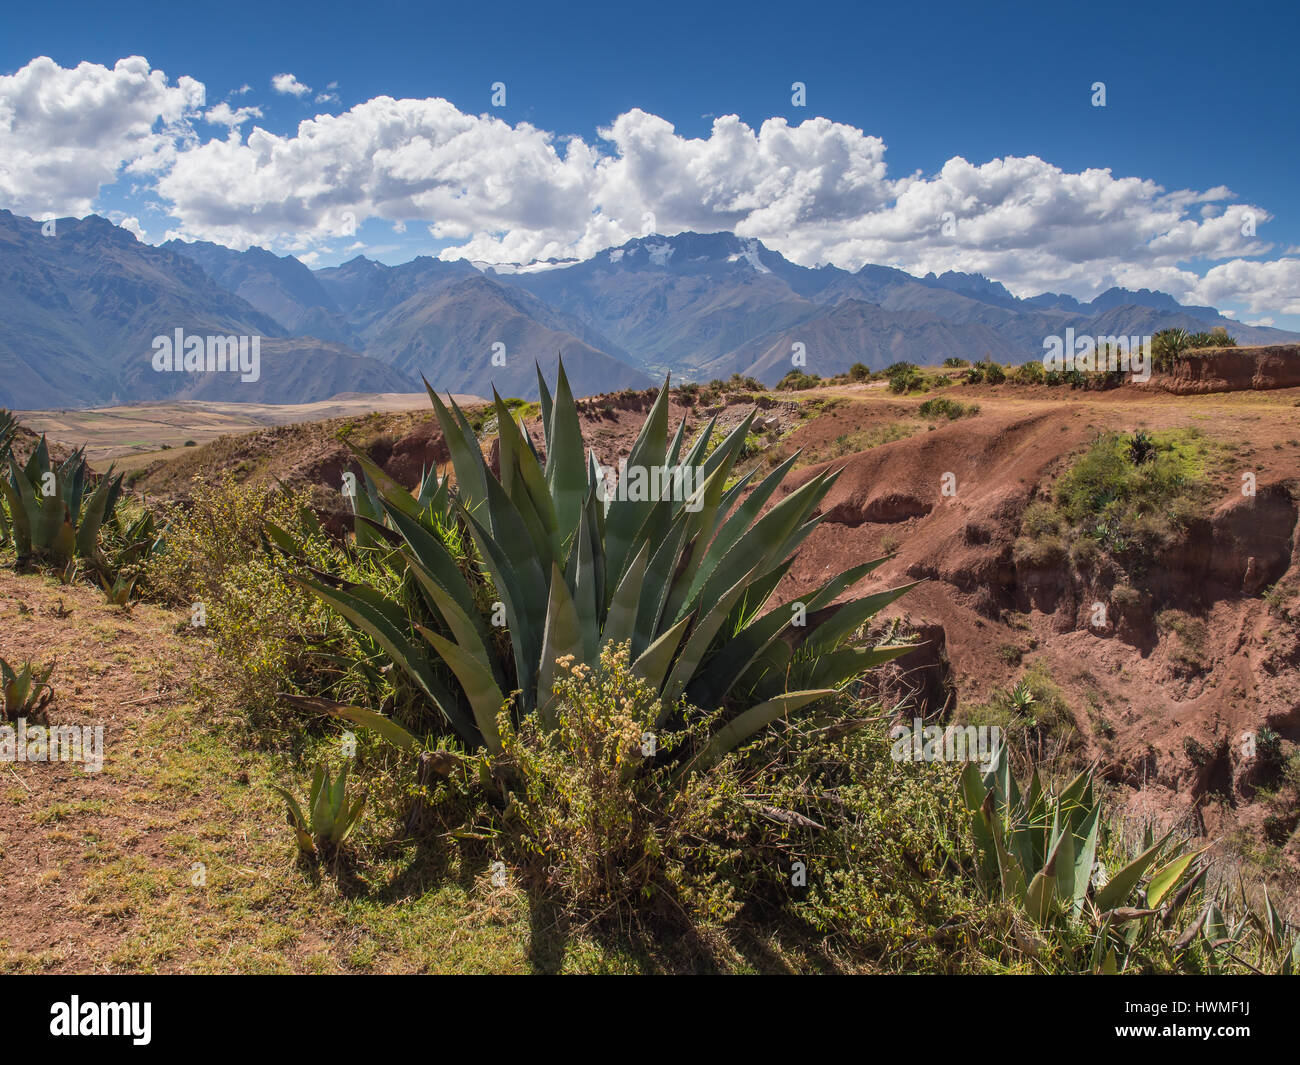 Andes mountains near Moray ruins, in the Sacred Valley of the Incas, Peru Stock Photo